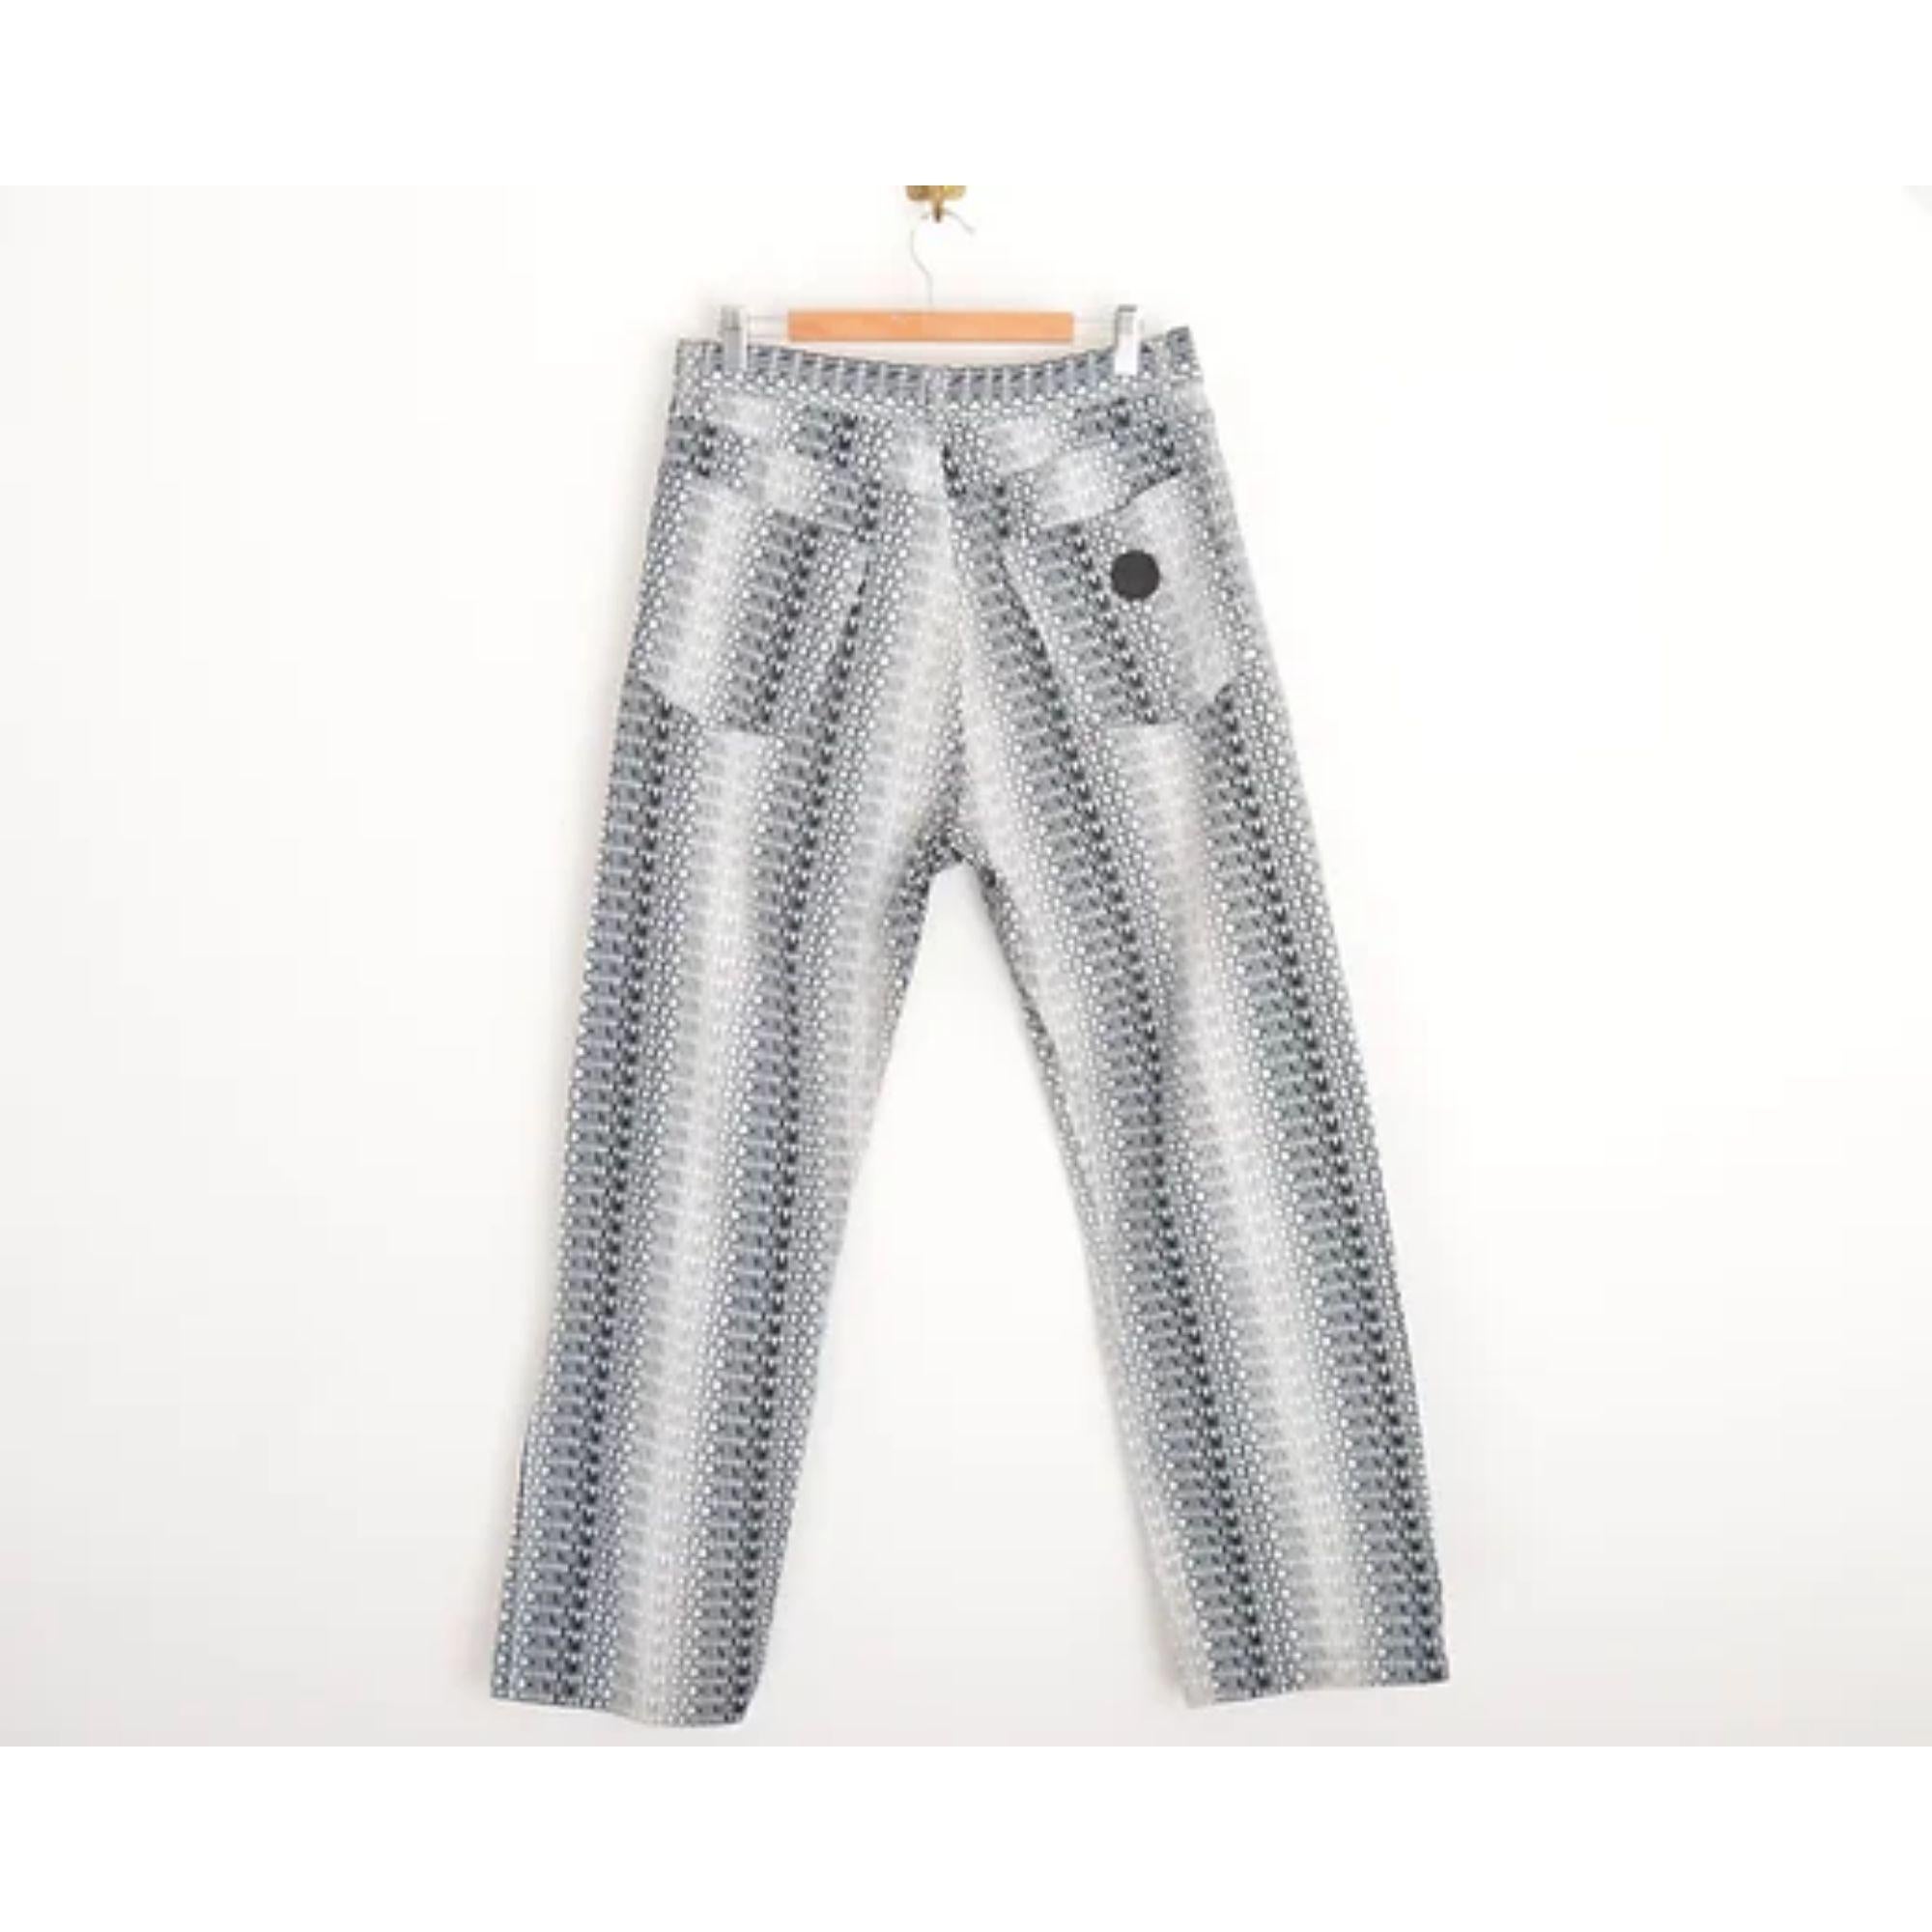 Iconic UK Garage Rave era Vintage Moschino 'Spell Out' Jeans in a white & black colourway with repeat 'Moschino' pattern through out. 

MADE IN ITALY !

Features:
High waisted 
Zip fasten
Classic x4 pocket design

Sizing given in inches: 
Waist: